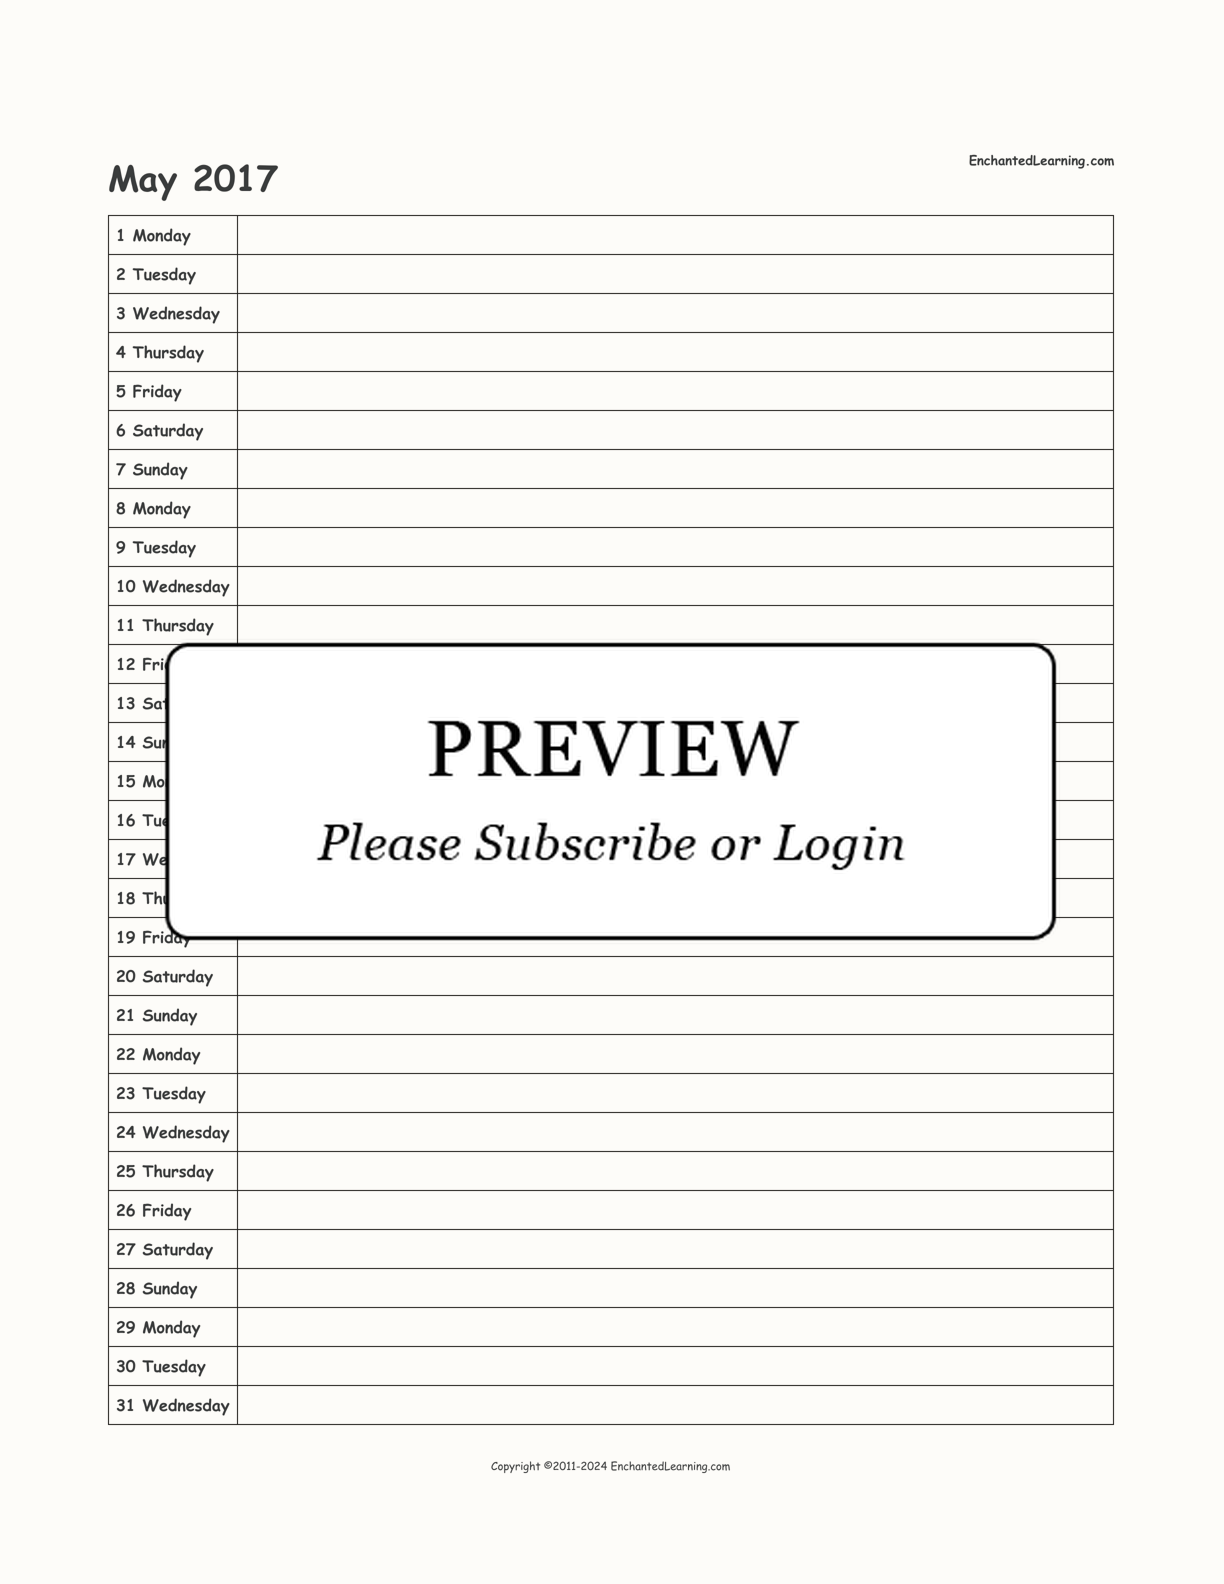 2017 Scheduling Calendar interactive printout page 5